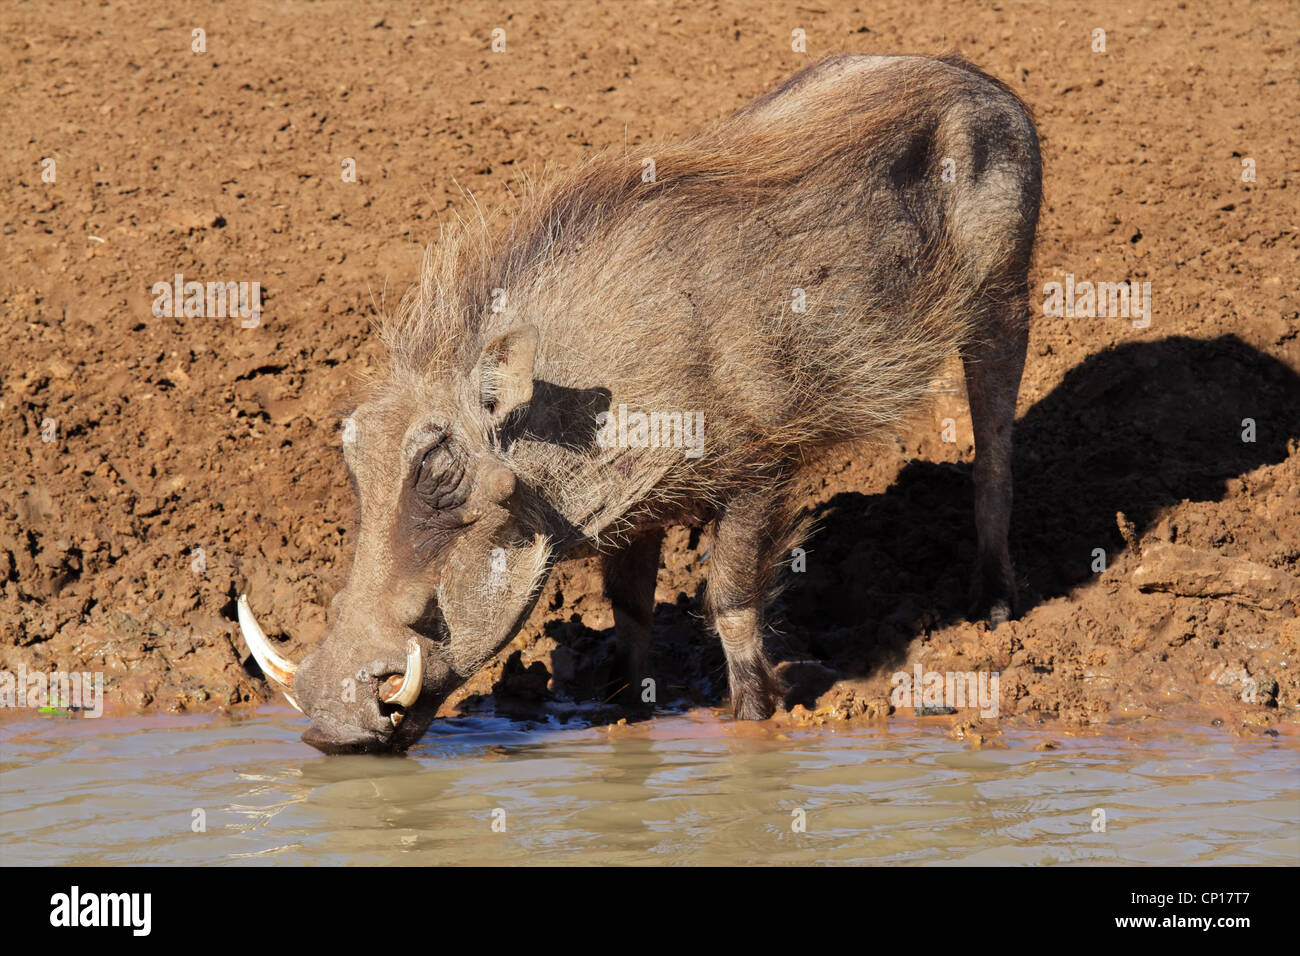 https://c8.alamy.com/comp/CP17T7/male-warthog-phacochoerus-africanus-drinking-water-mkuze-game-reserve-CP17T7.jpg